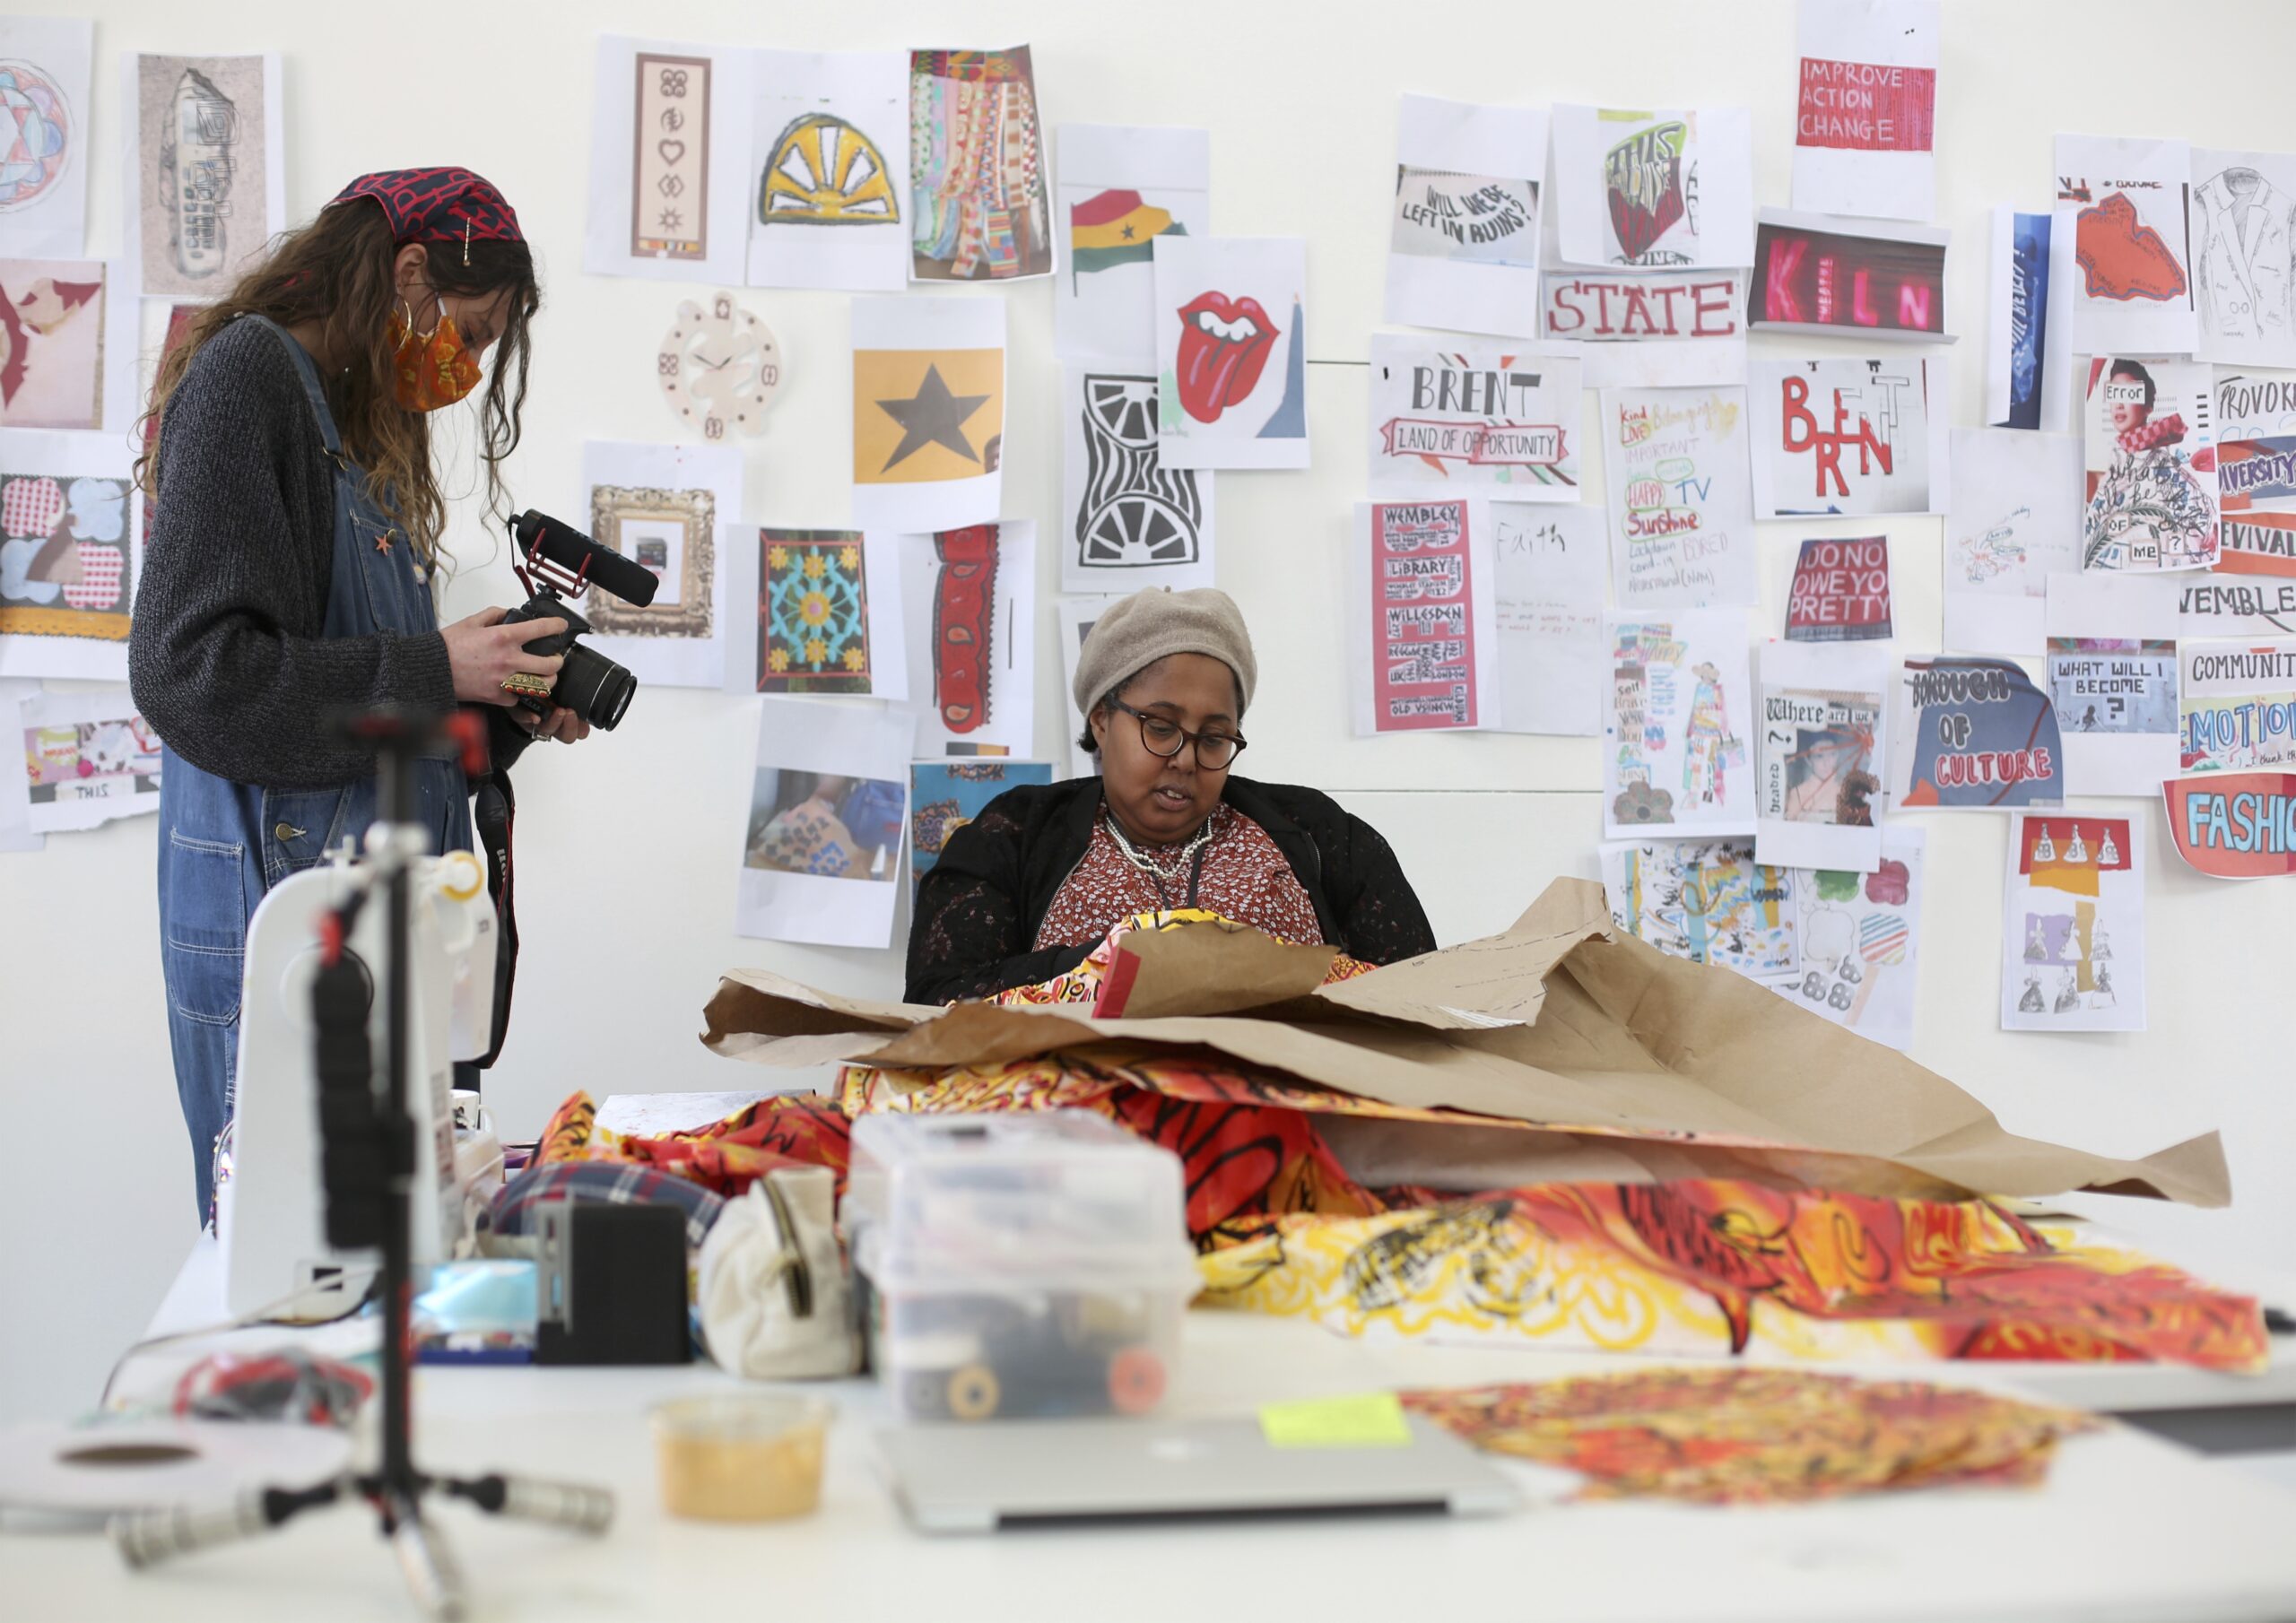 A woman stands with a video camera in an art gallery. She is filming a Black woman wearing glasses who is sat down and busy dressmaking. On the walls behind them are colourful works of art.